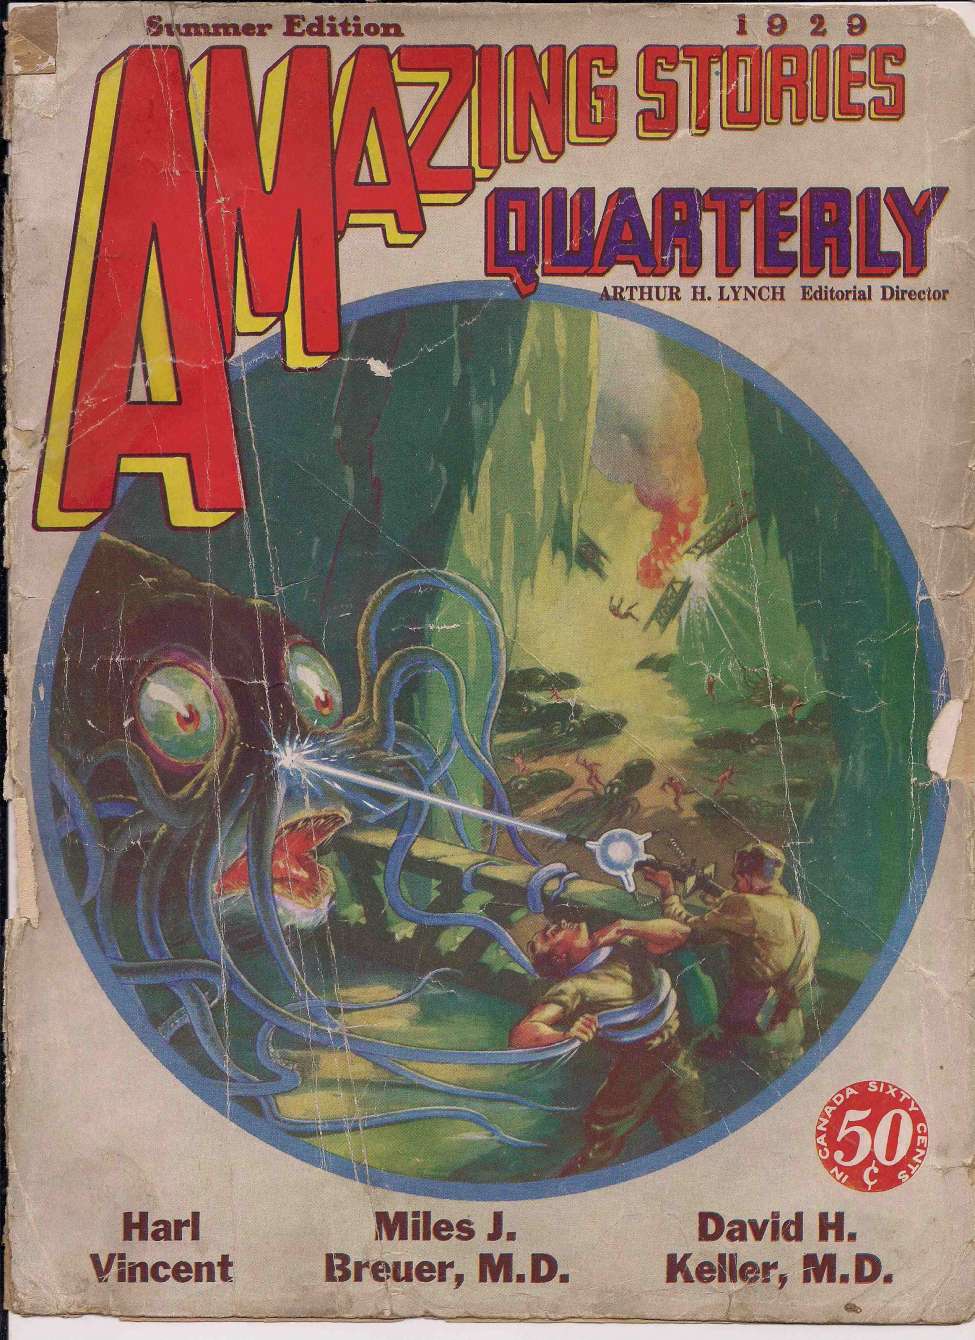 Book Cover For Amazing Stories Quarterly v2 3 - Venus Liberated - Harl Vincent